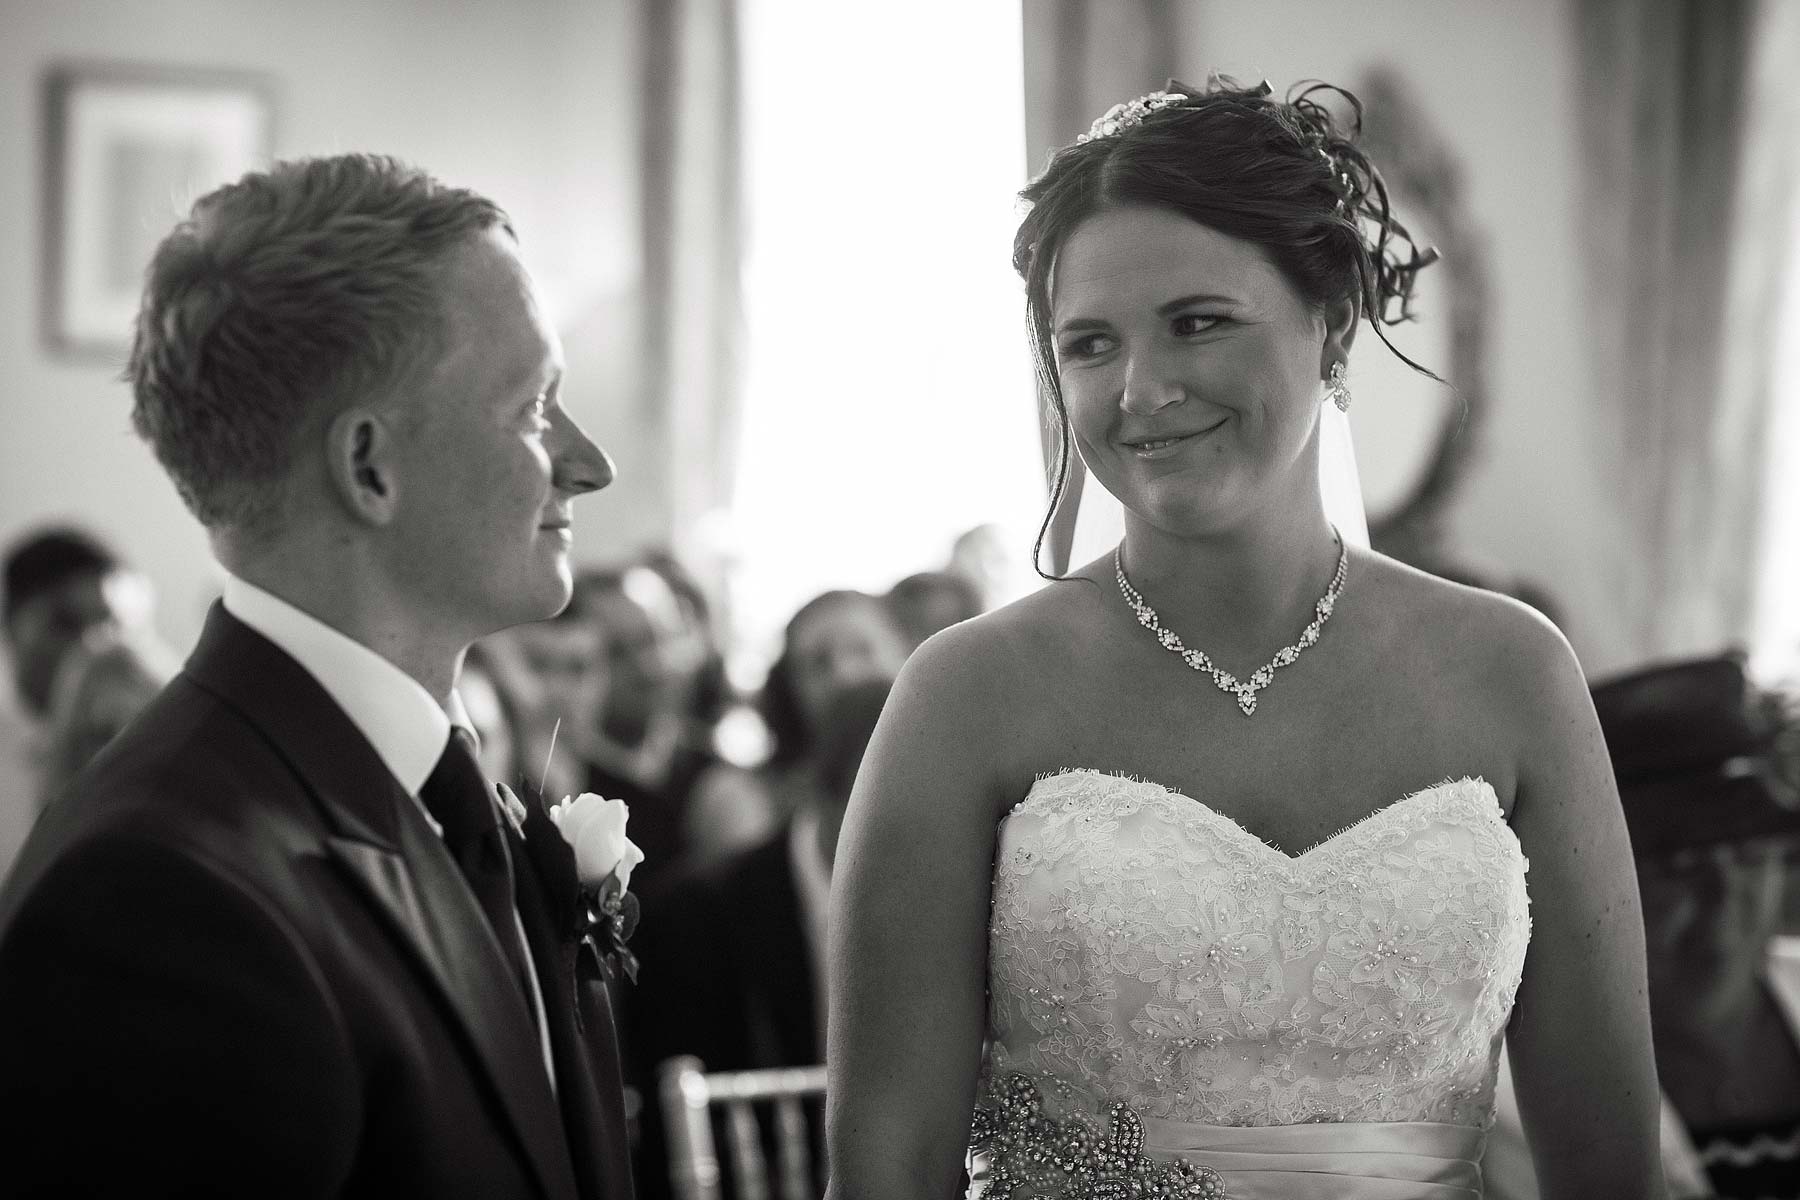 Beautiful wedding ceremony at Somerford Hall in Brewood by Reportage Wedding Photographer Stuart James